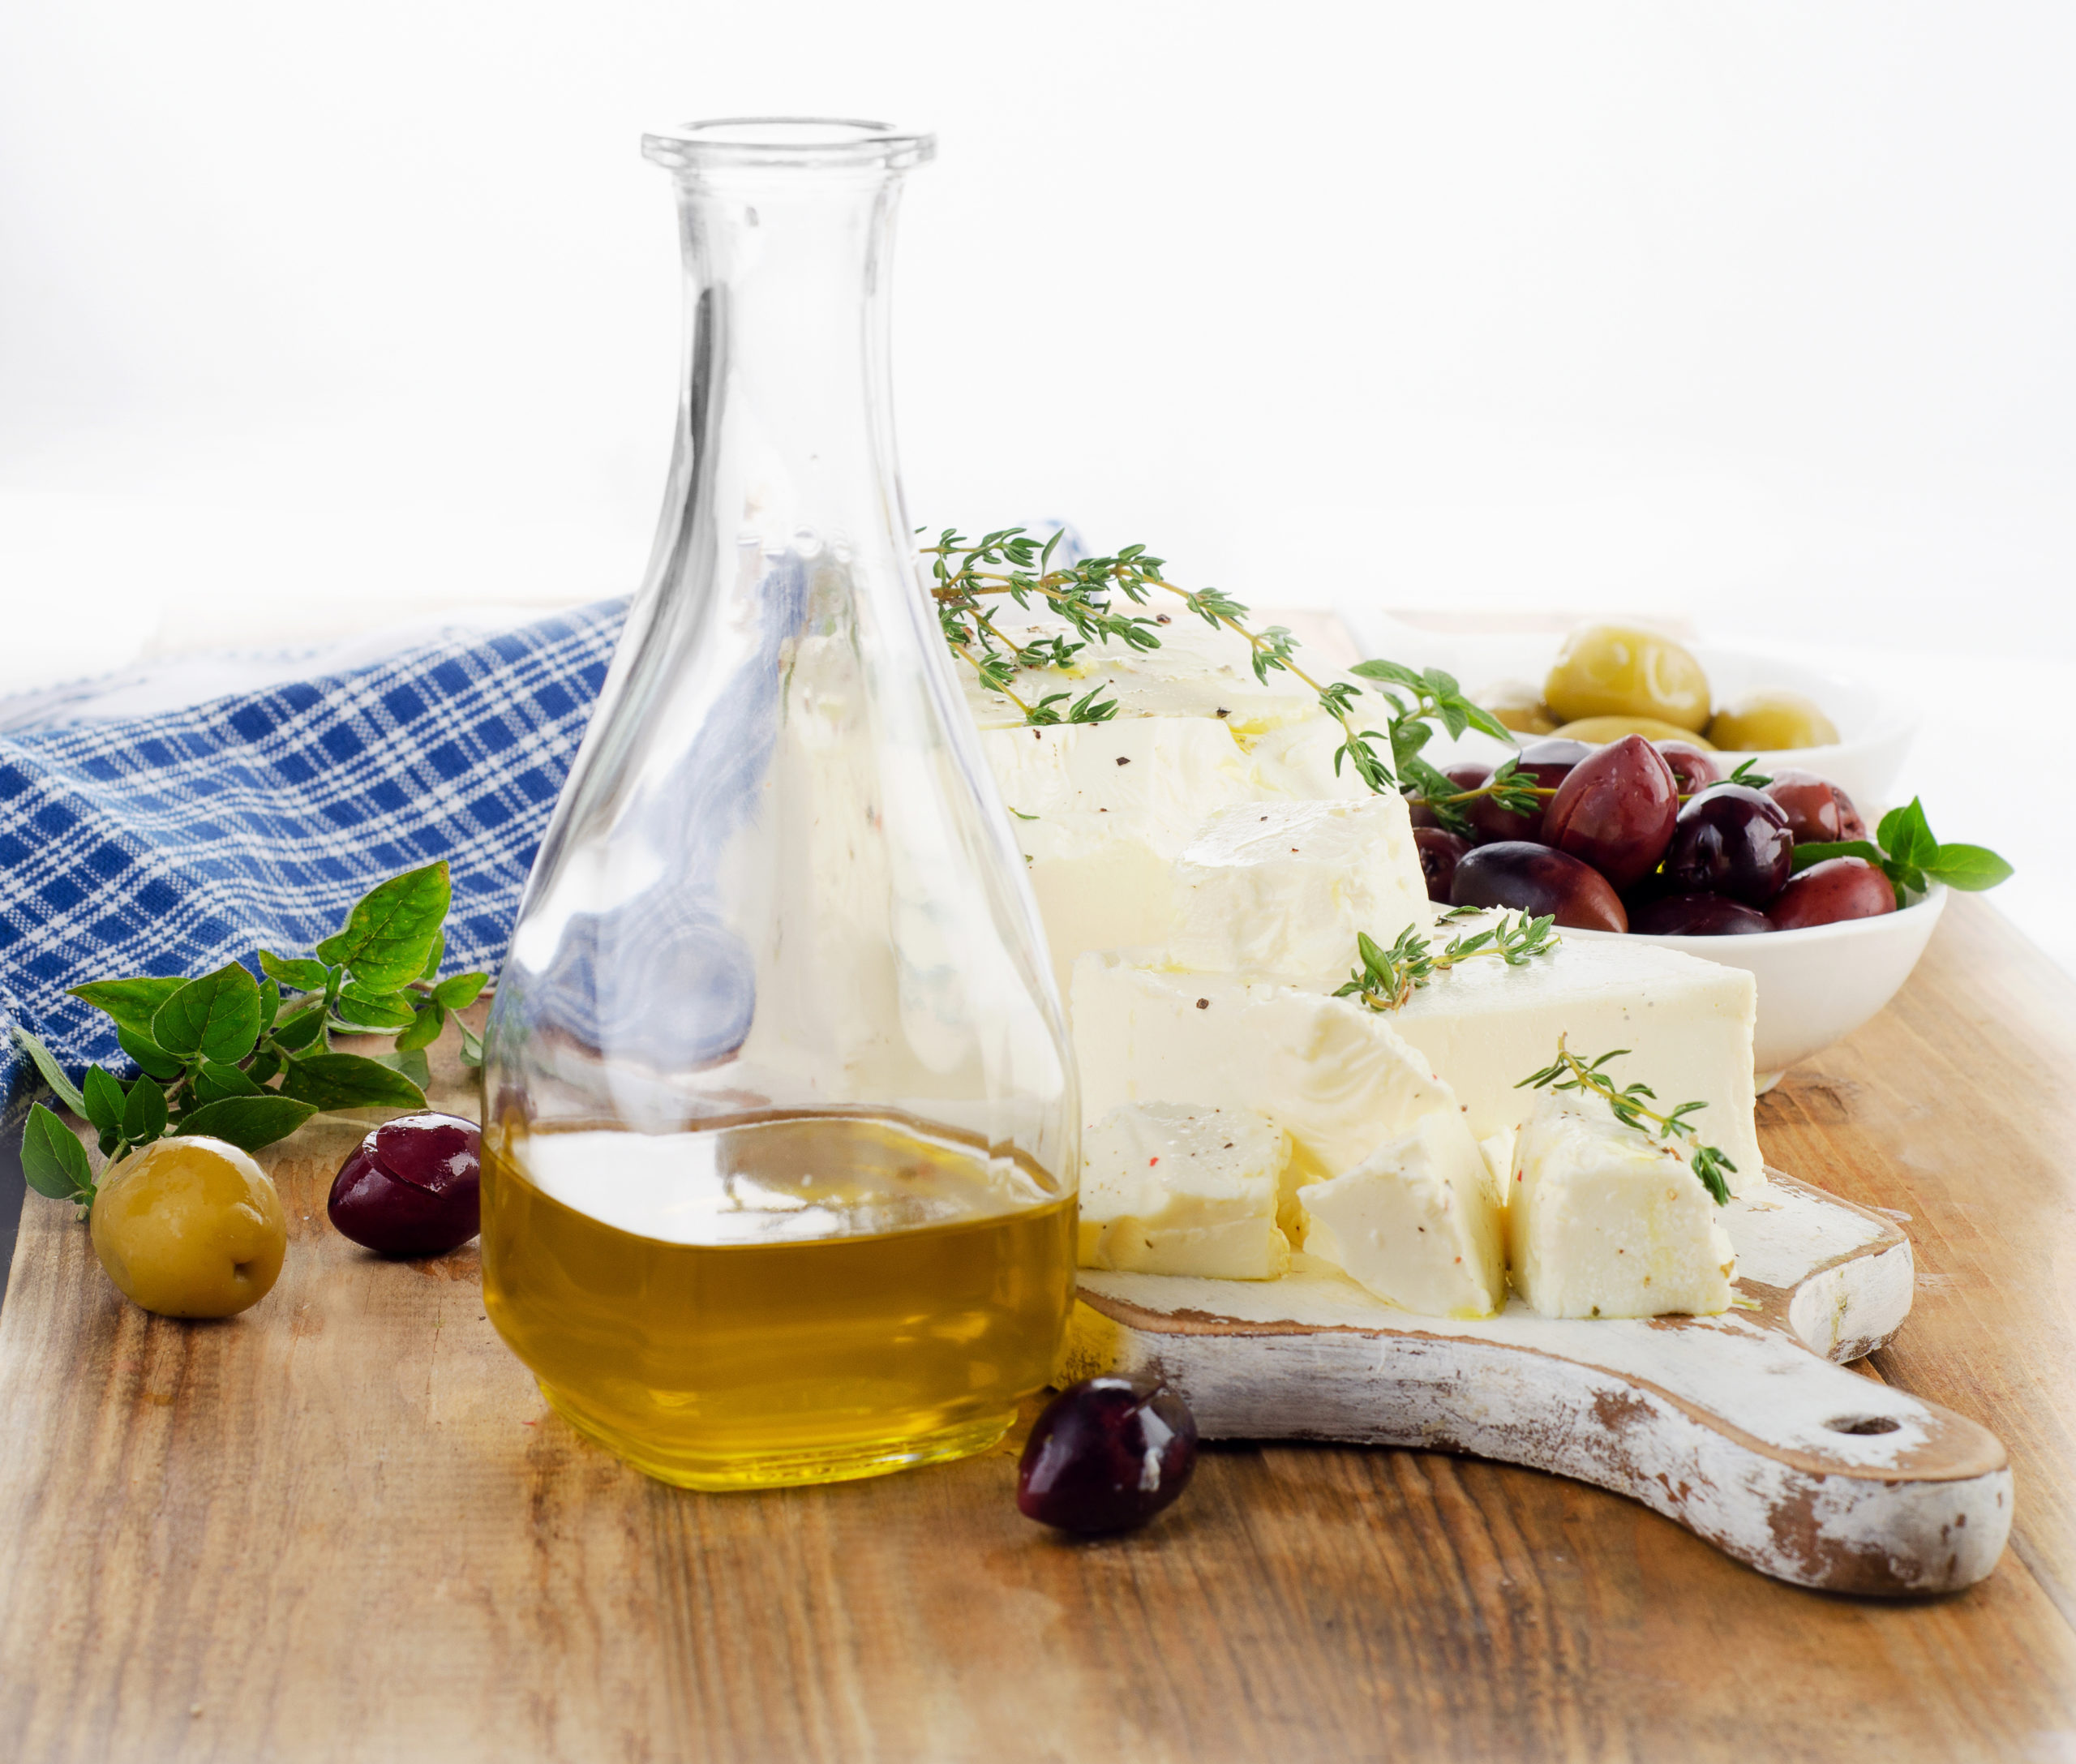 Feta cheese with olives, fresh herbs and olive oil.